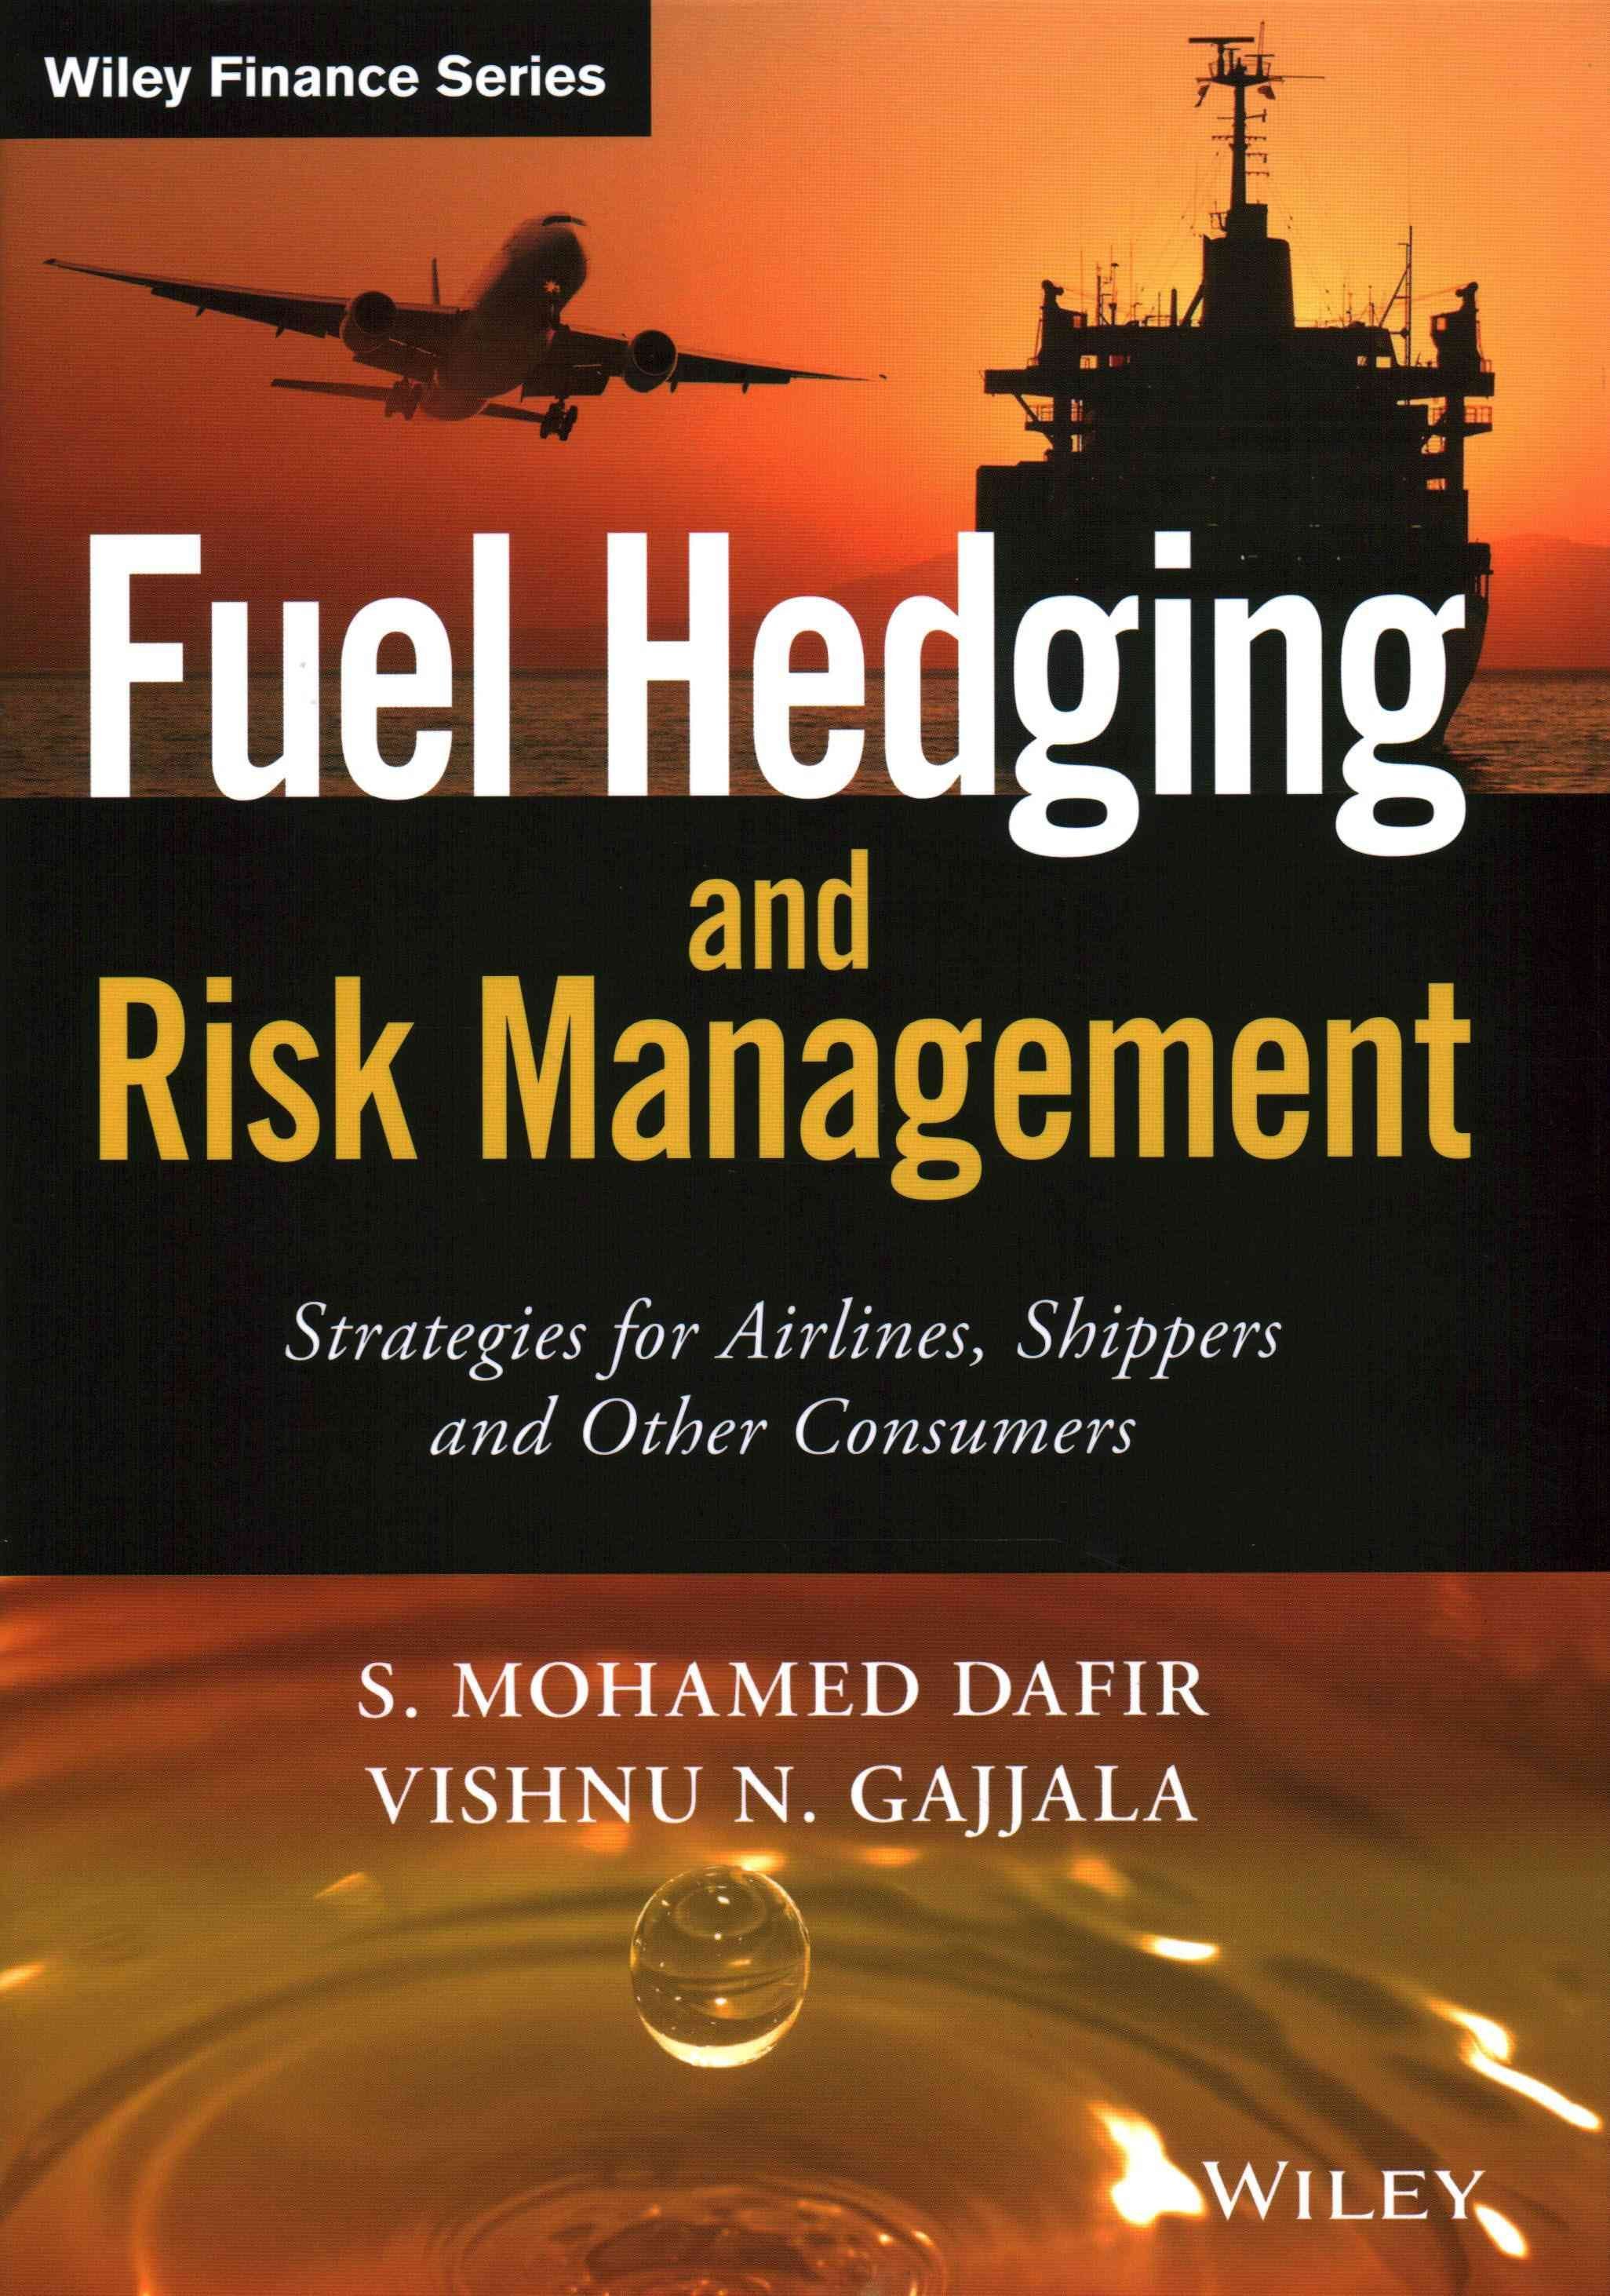 Fuel Hedging And Risk Management - Strategies For Airlines, Shippers And Other Consumers